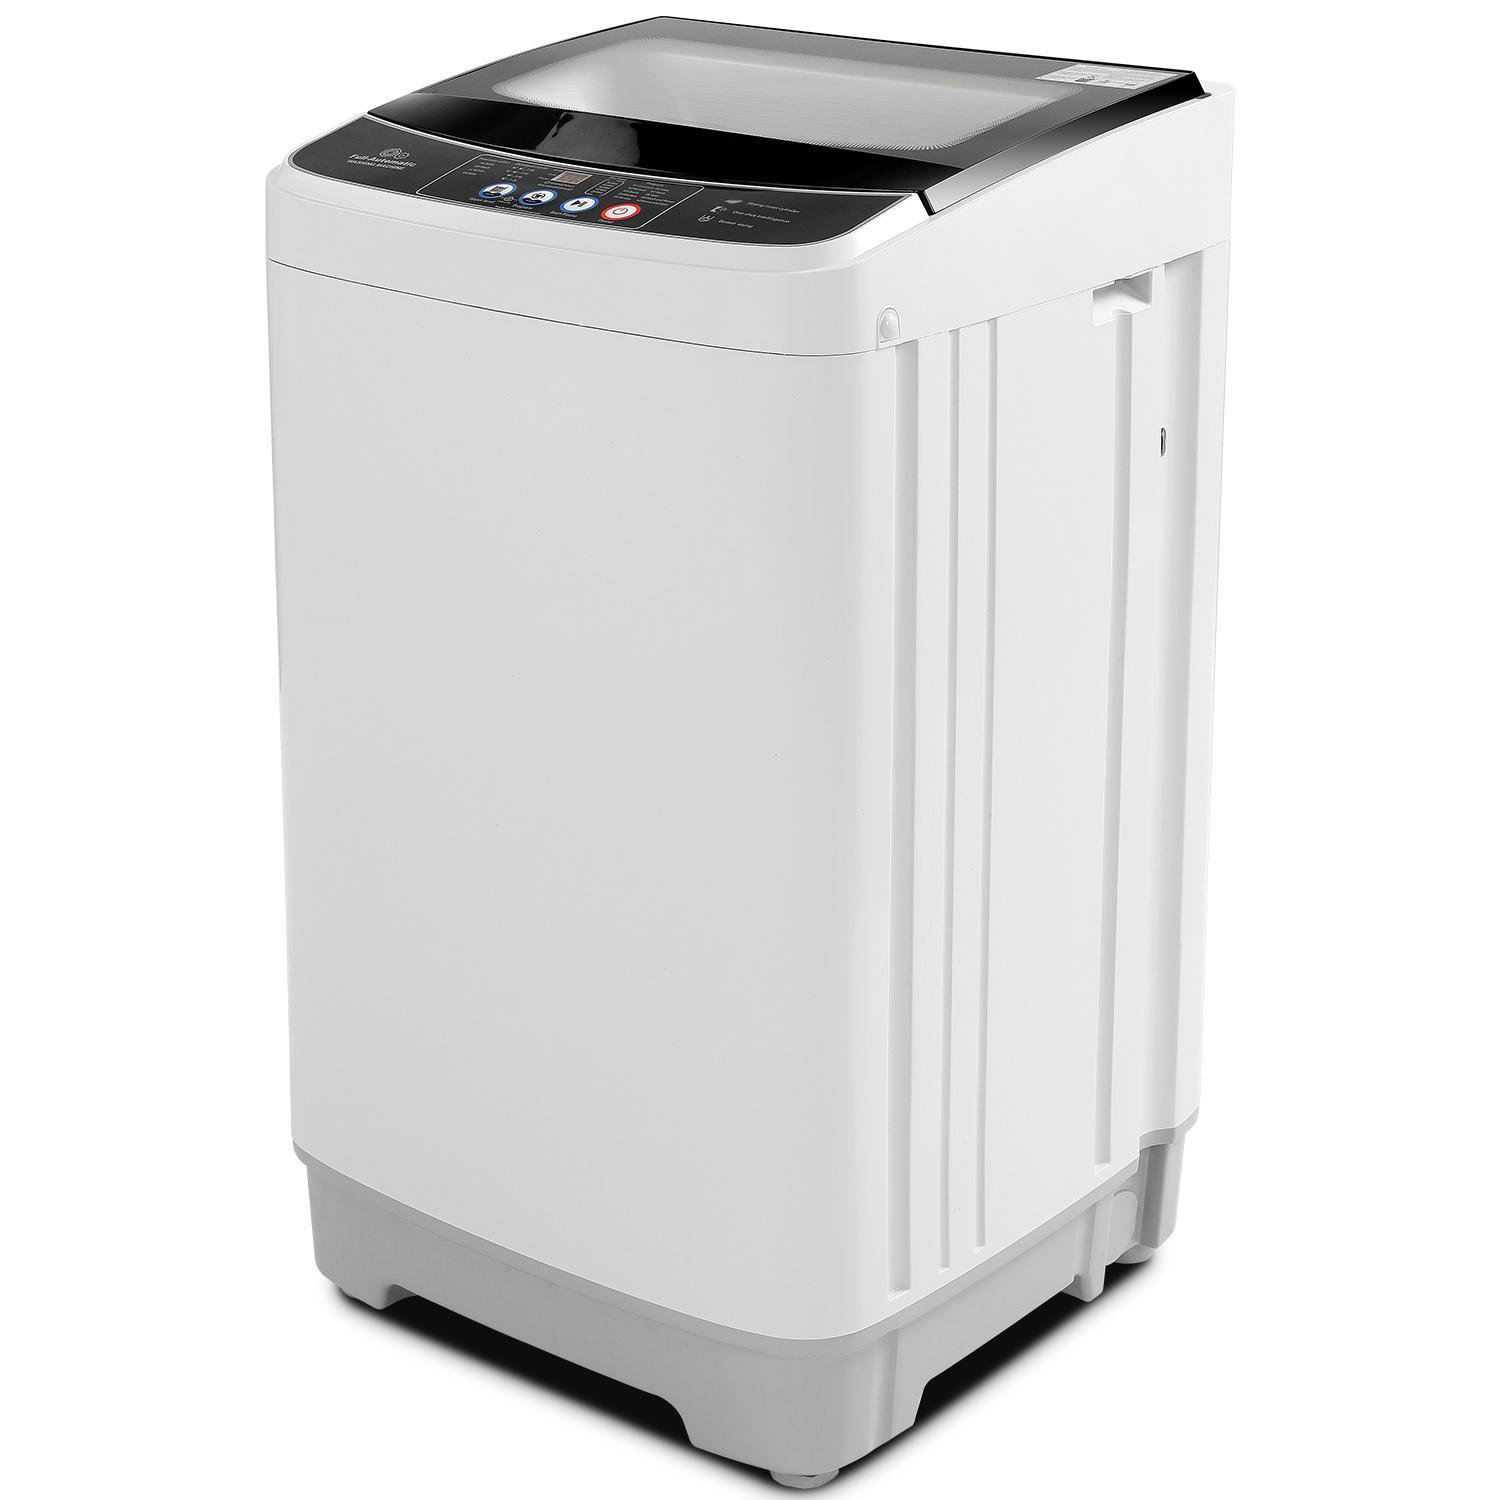 Auertech Portable Washing Machine With Spin Dryer Barely for Sale